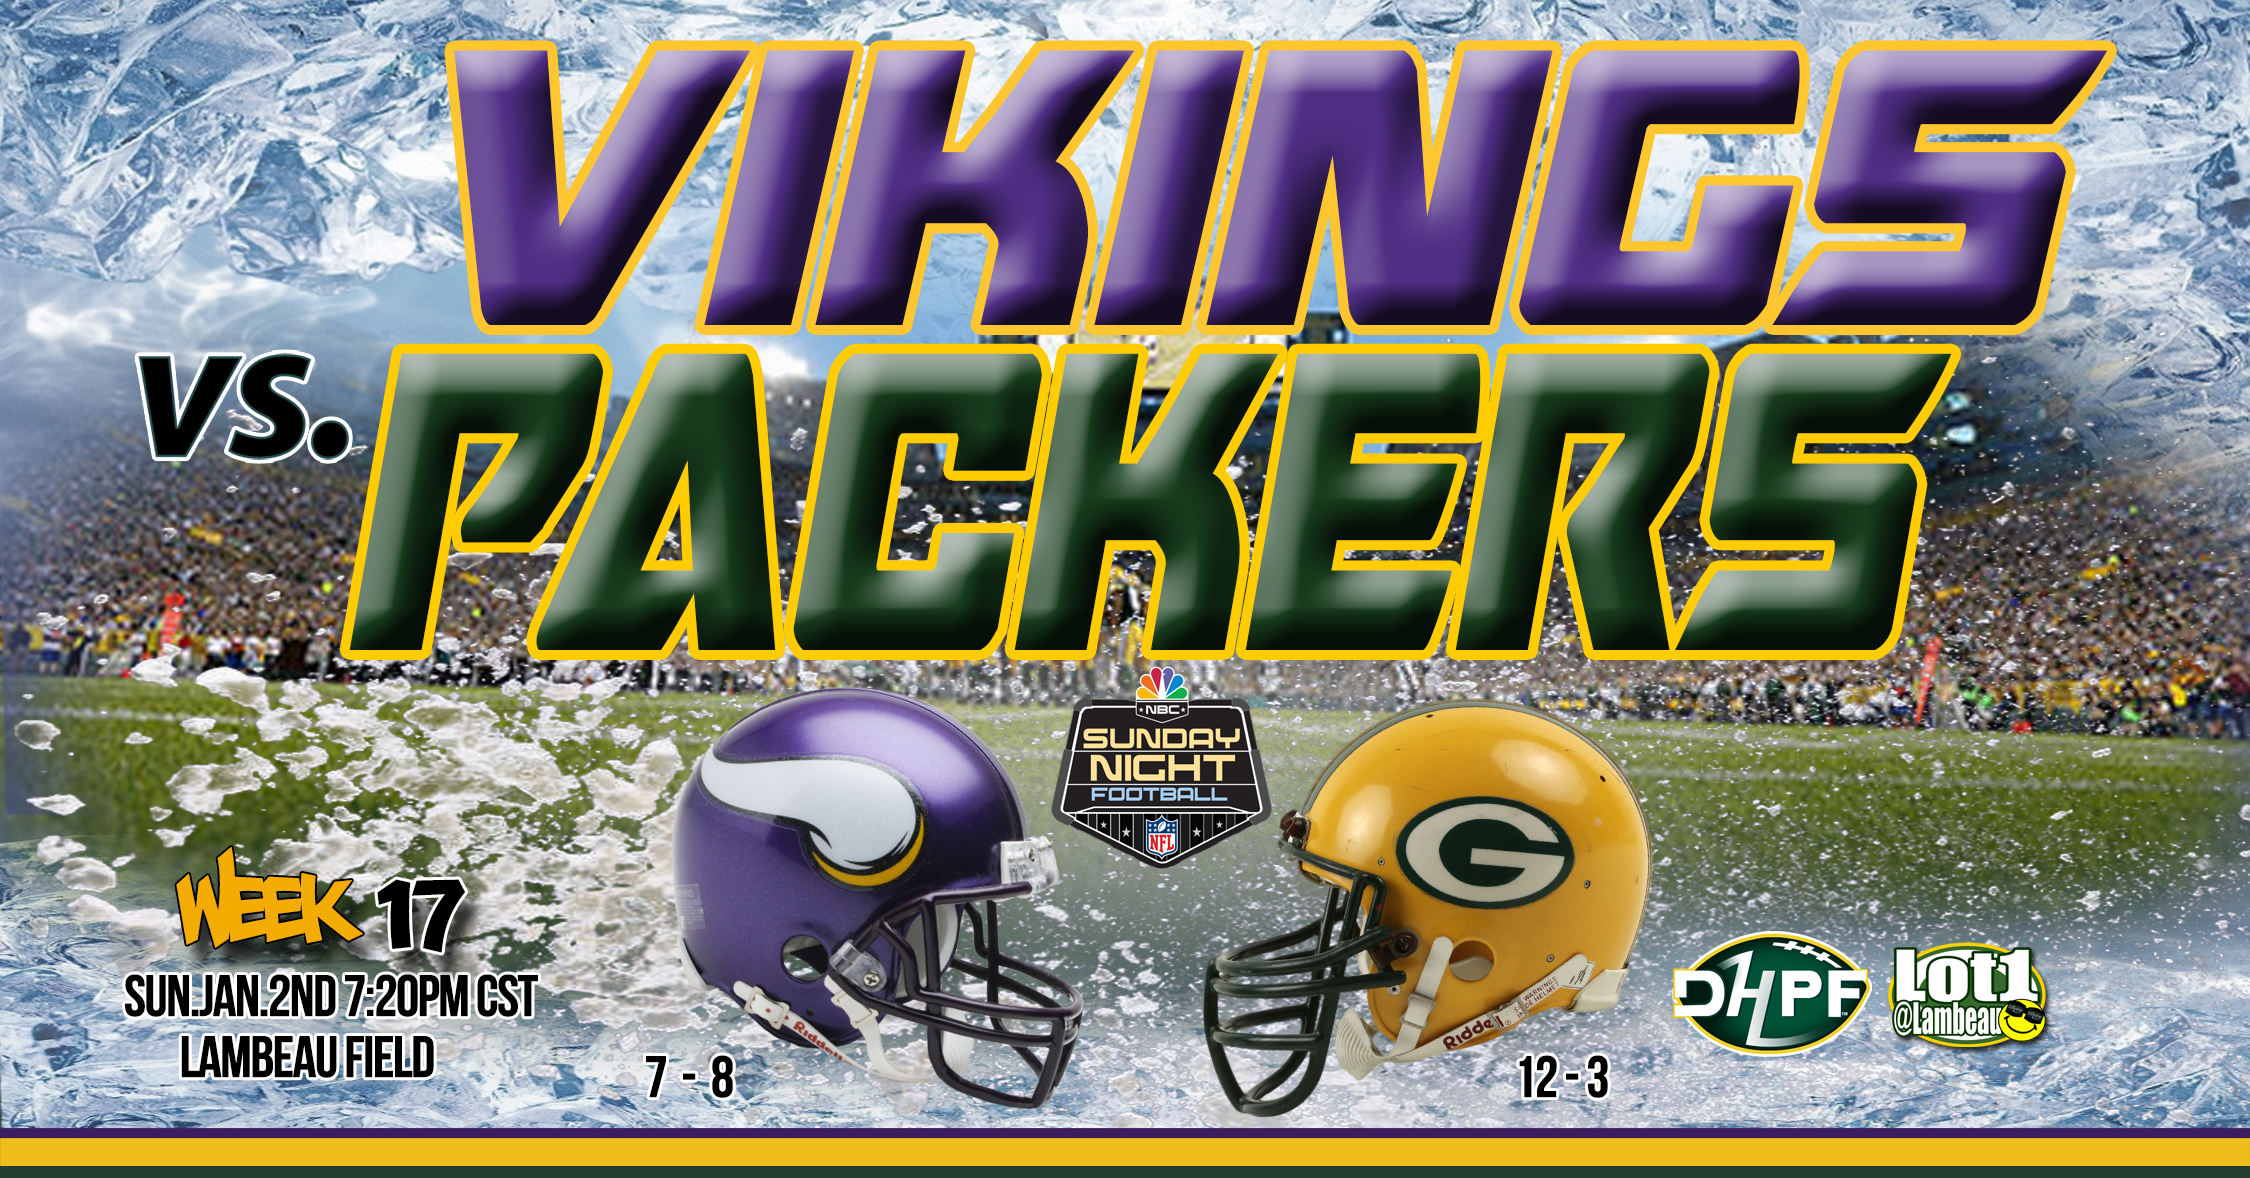 Packers look to get red hot during a chilly Sunday night vs the